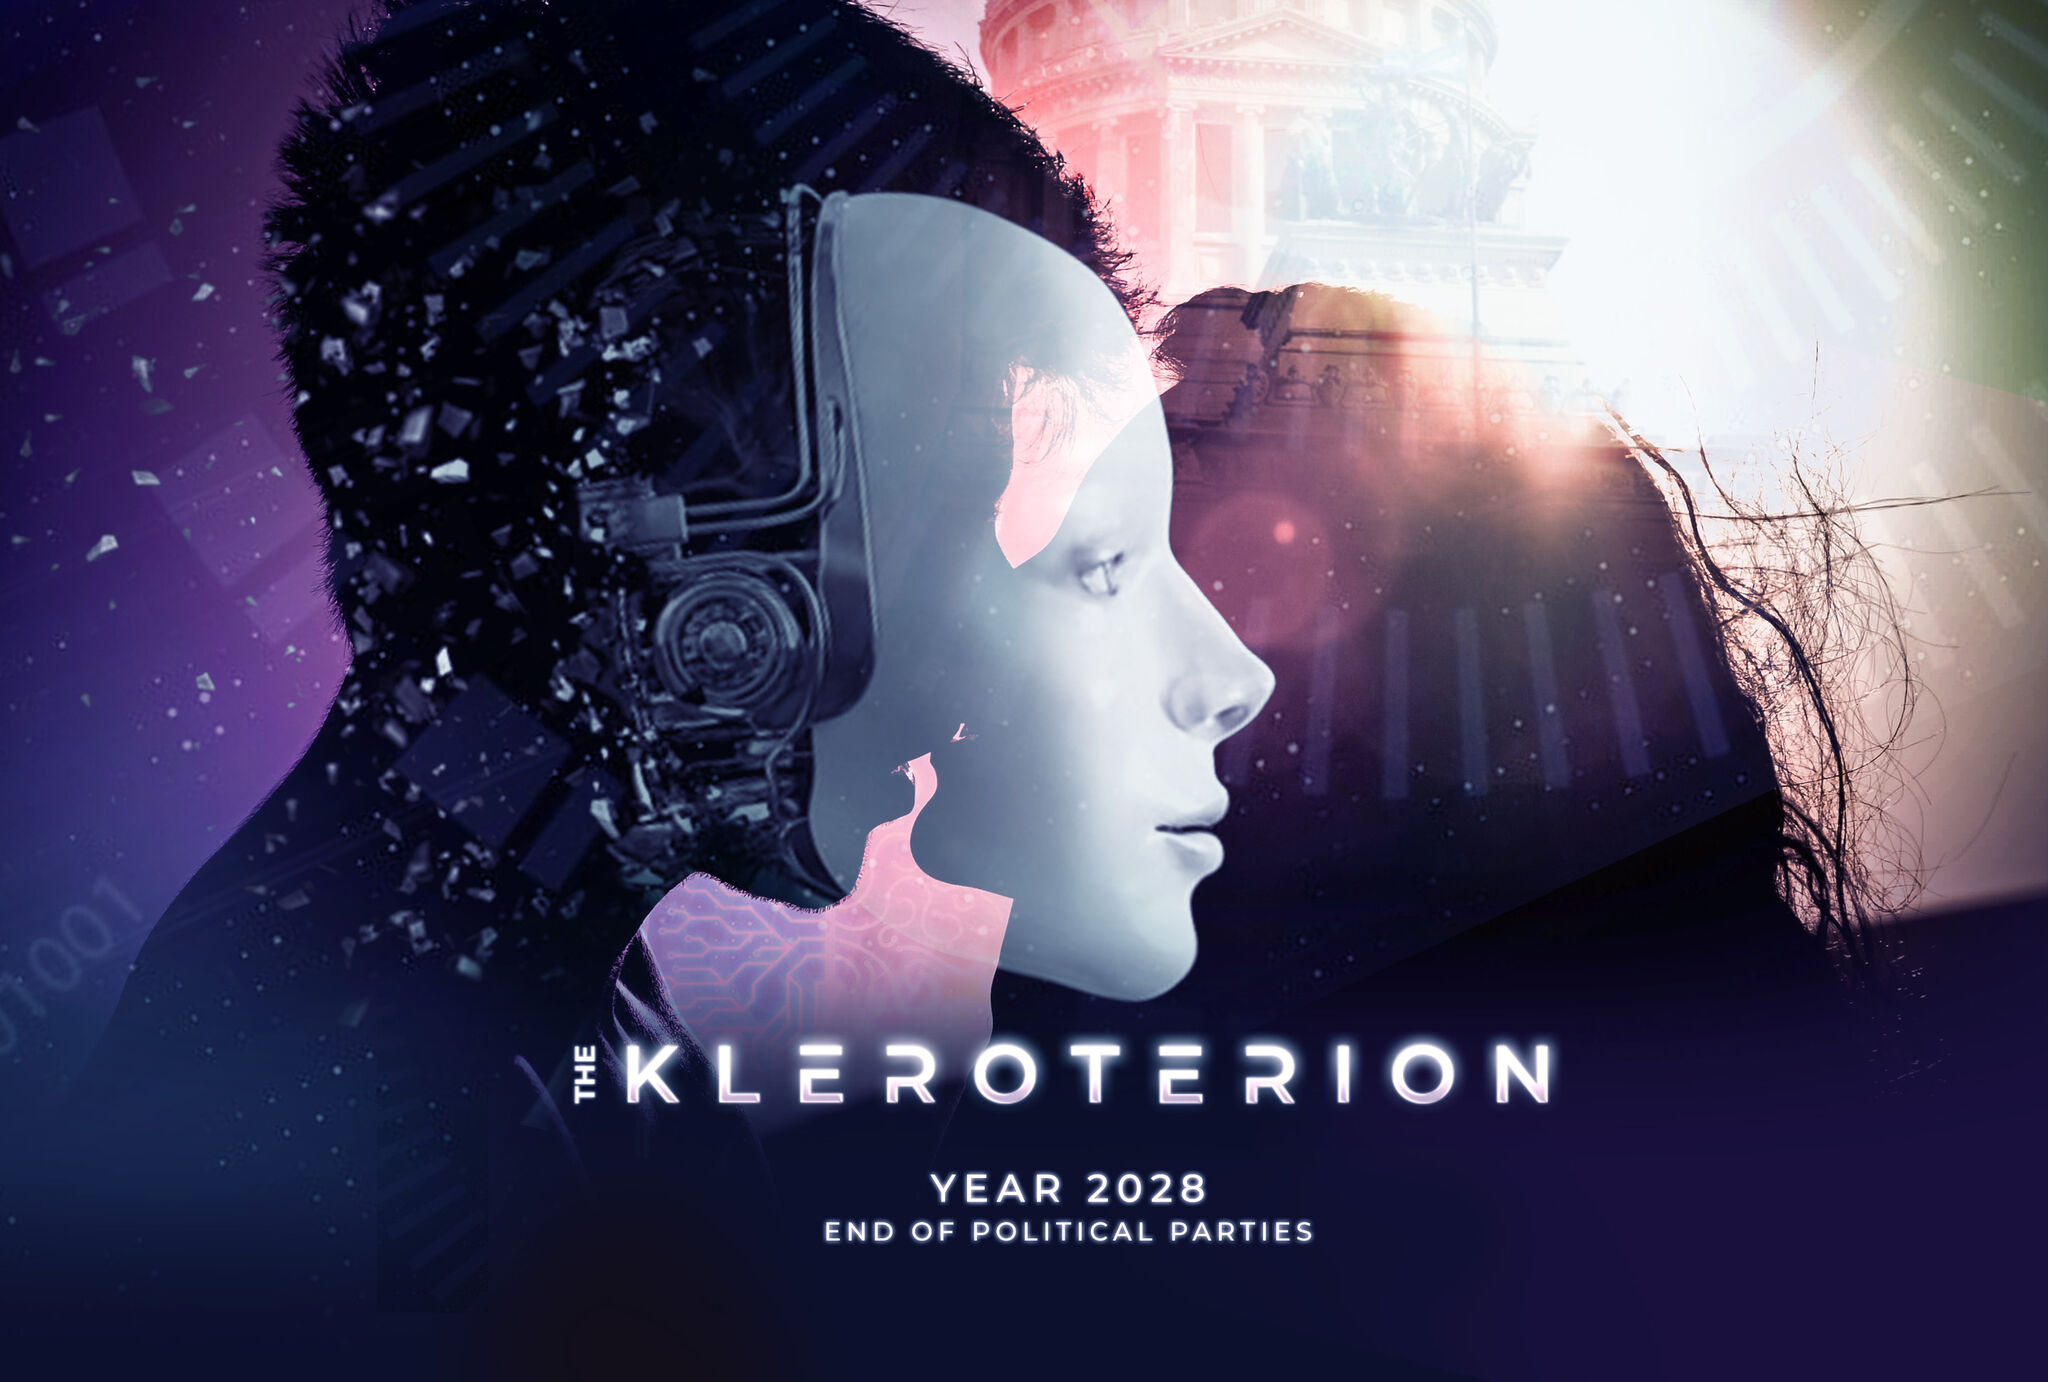 THE KLEROTERION